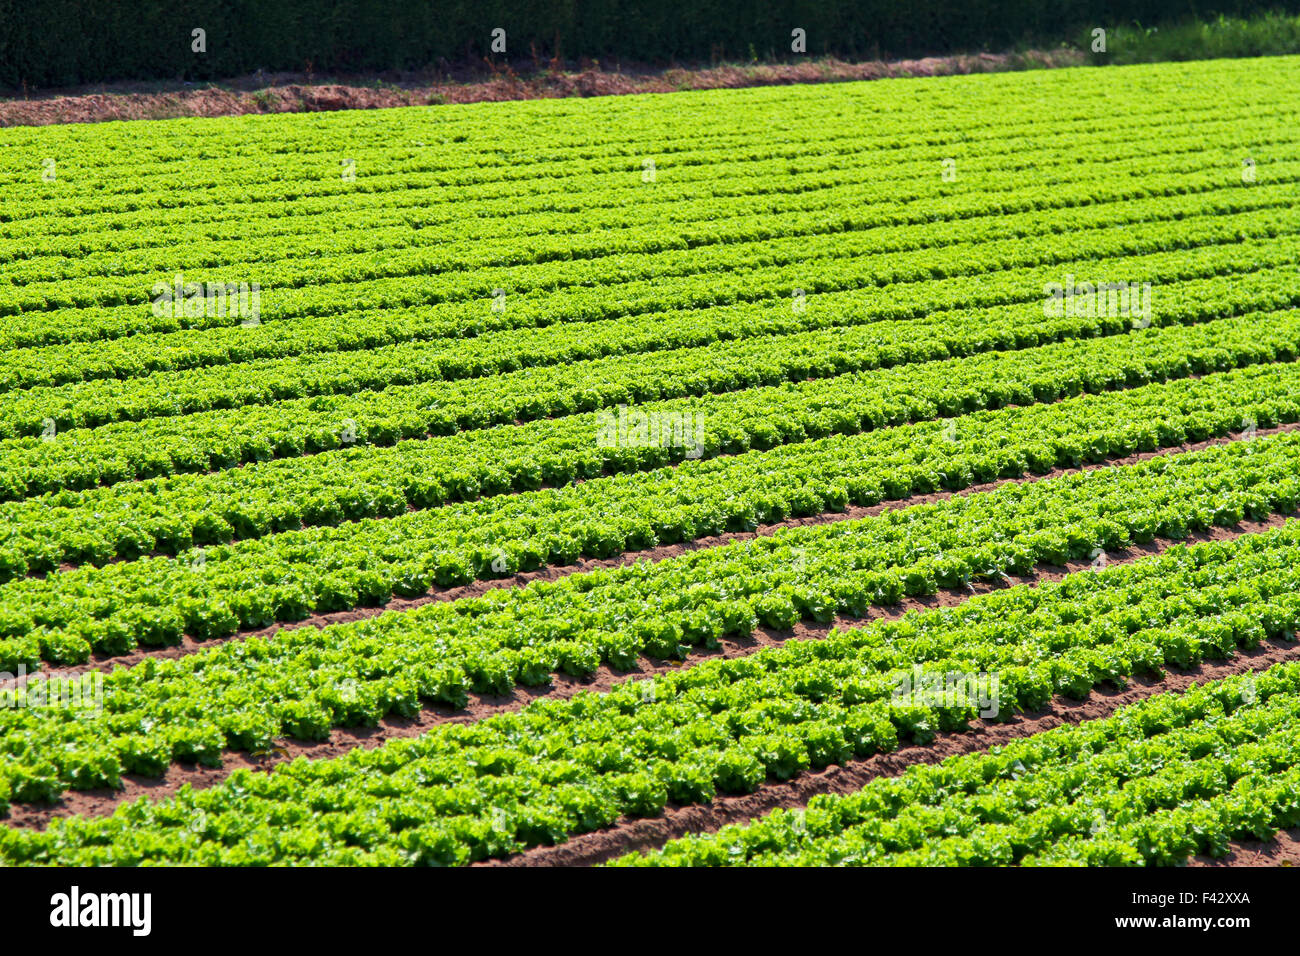 Organic salad at agriculture field in rows Stock Photo